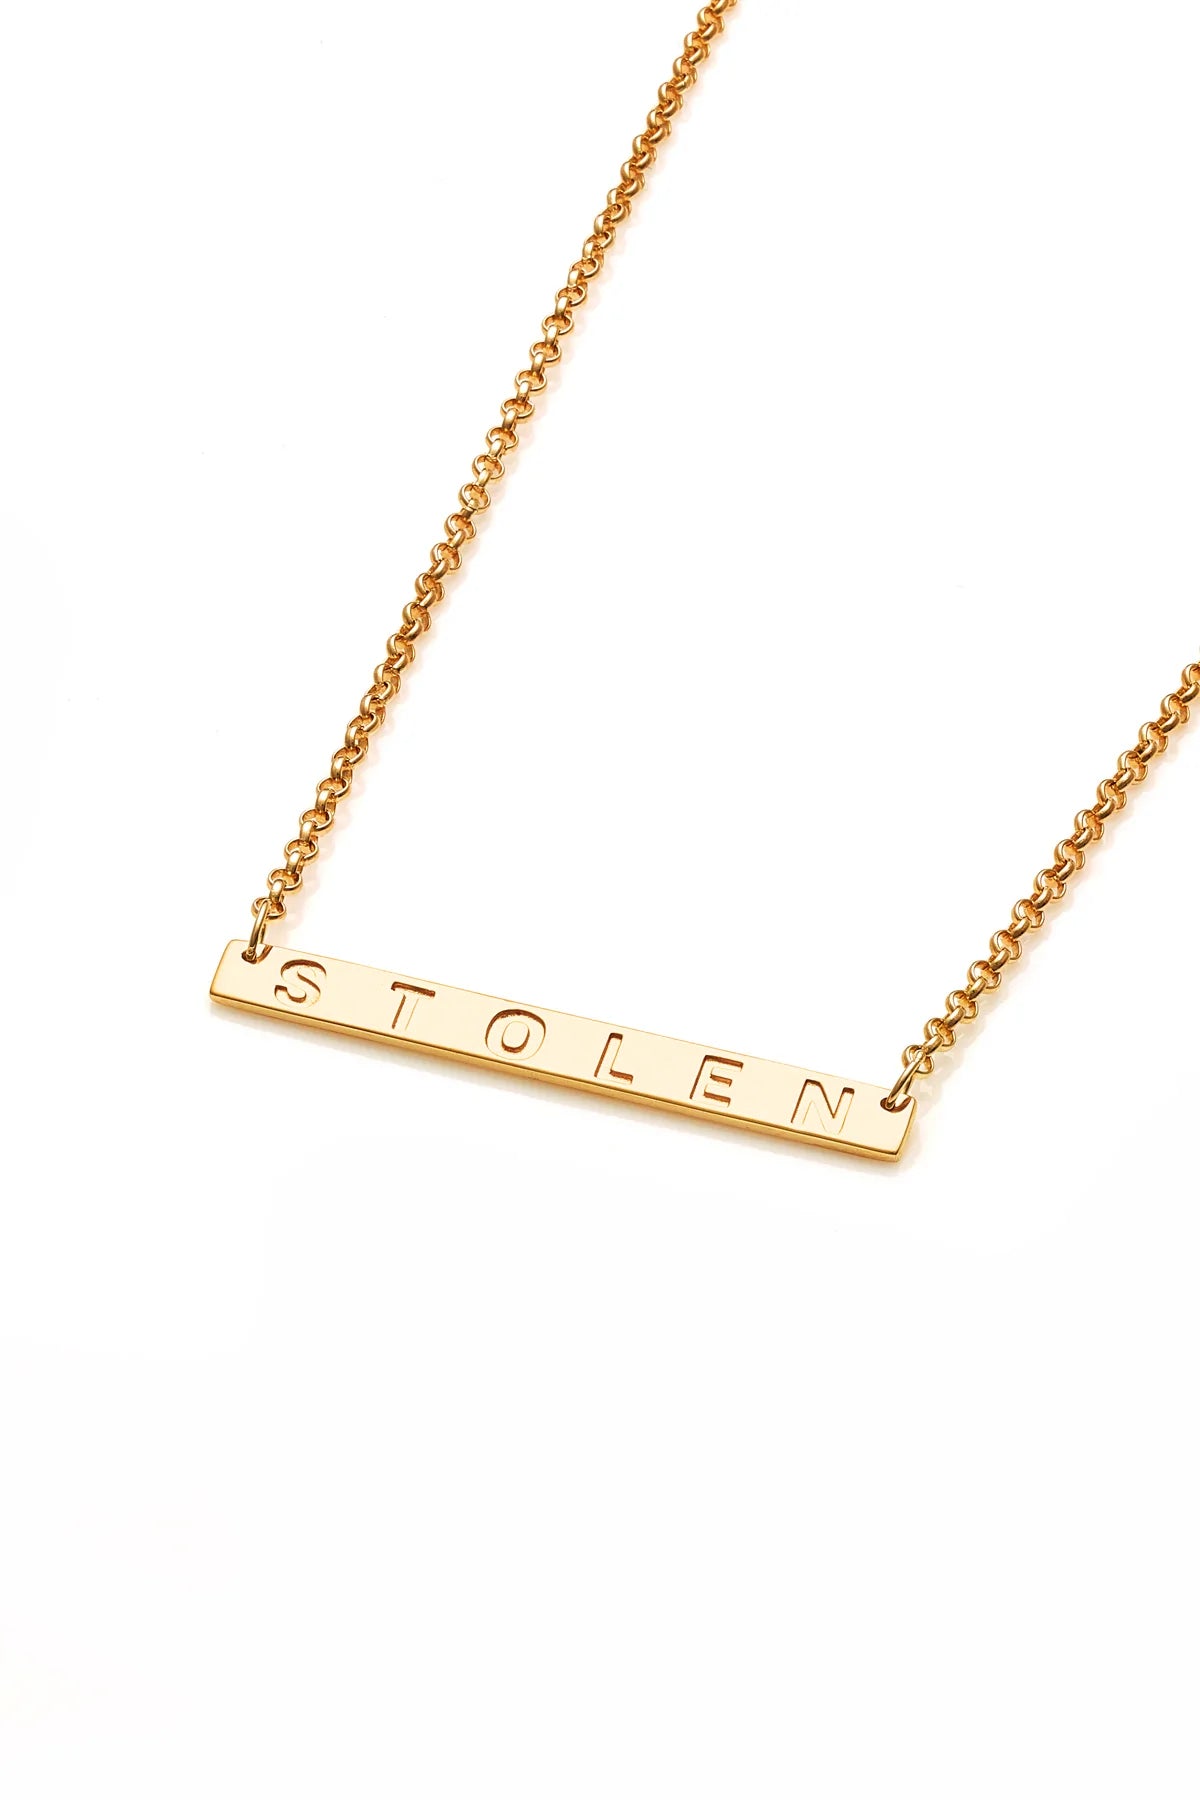 Stolen Plank Necklace By Stolen Girlfriends Club - Gold Plated